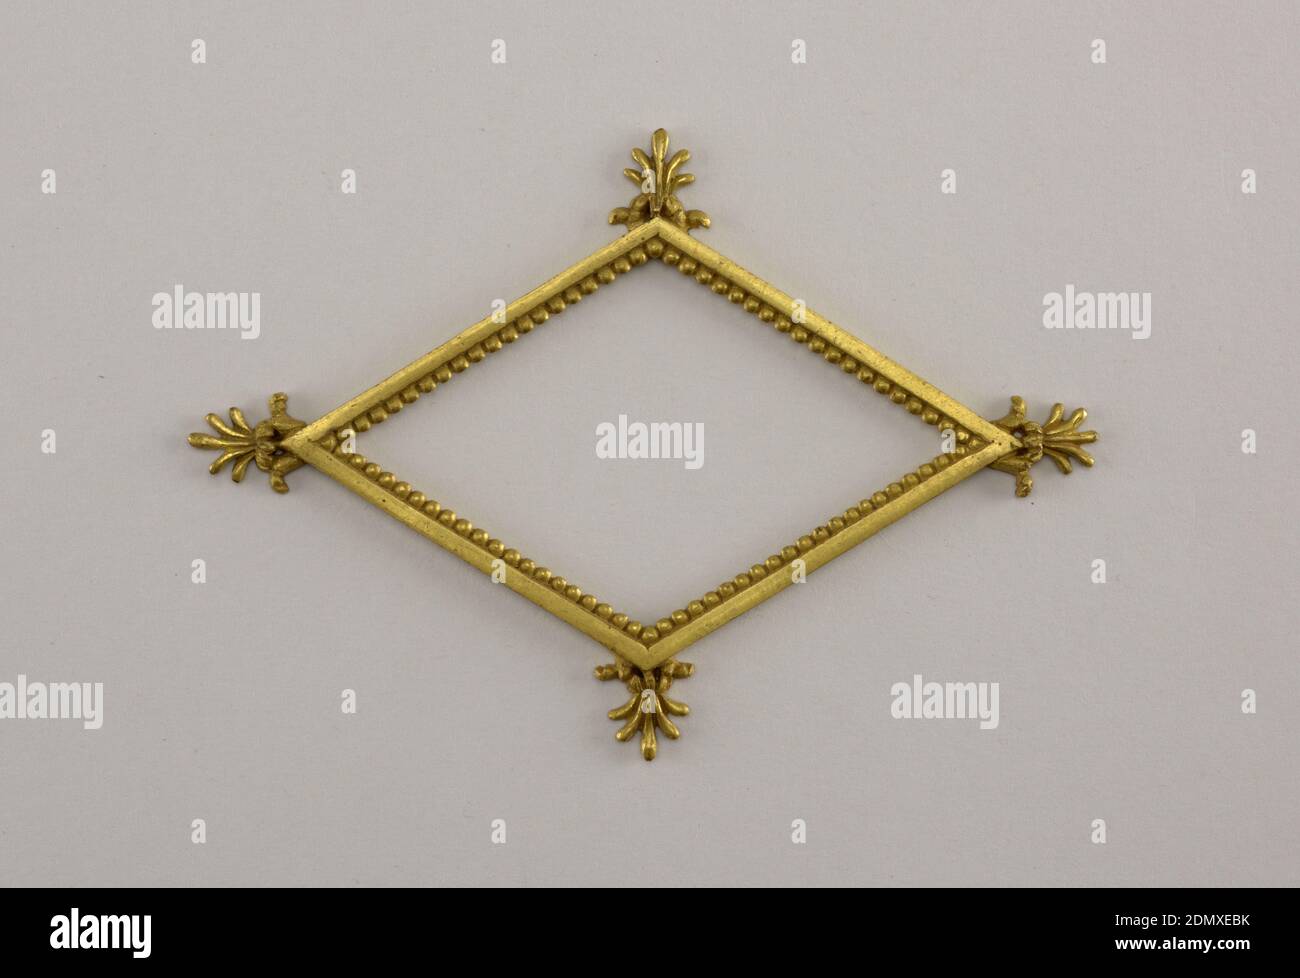 Frame, Cast and gilt bronze, Horizontally oriented lozenge-shaped form with palmettes at each corner., France, ca. 1800, metalwork, Decorative Arts, Frame Stock Photo